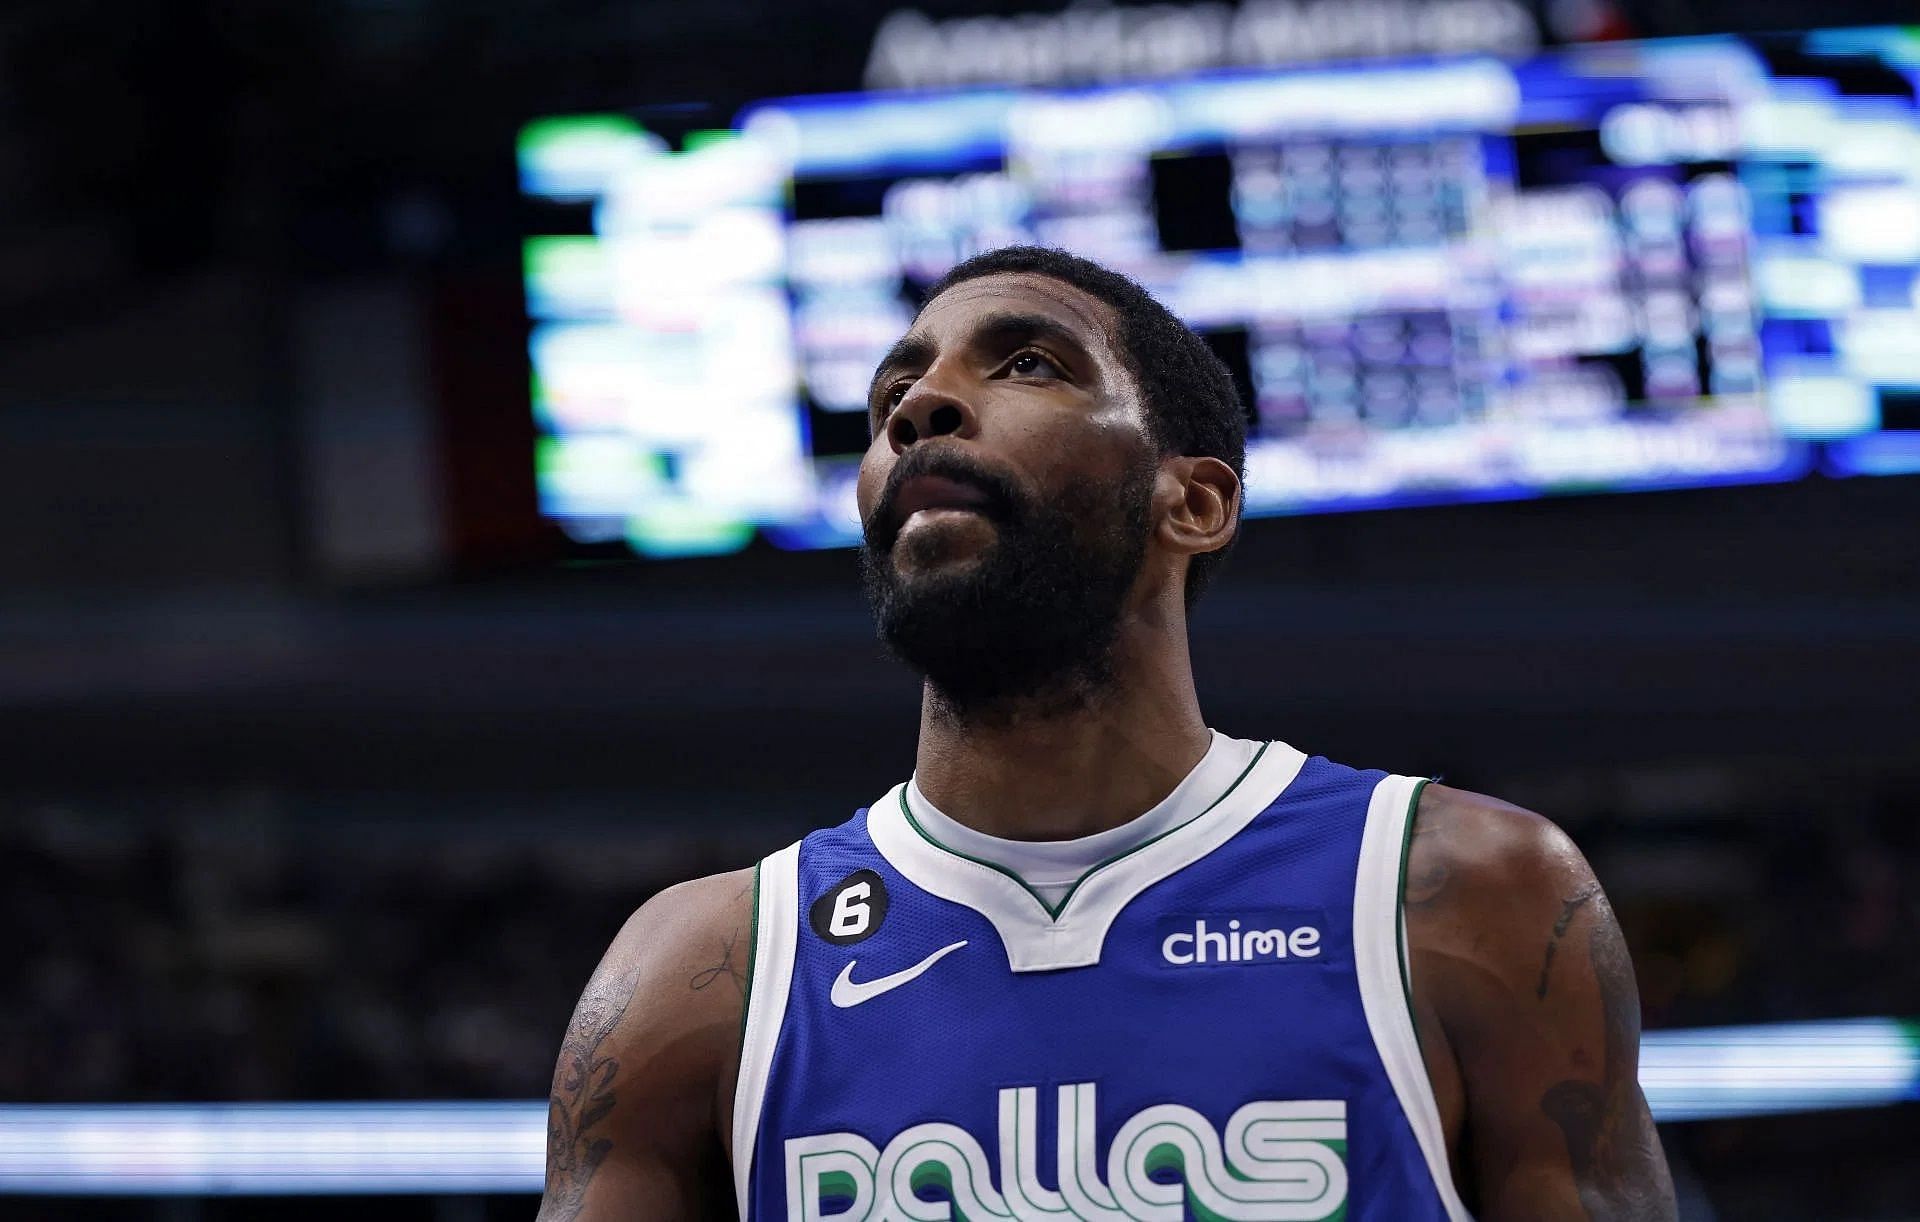 Guard Kyrie Irving currently plays for the Dallas Mavericks.